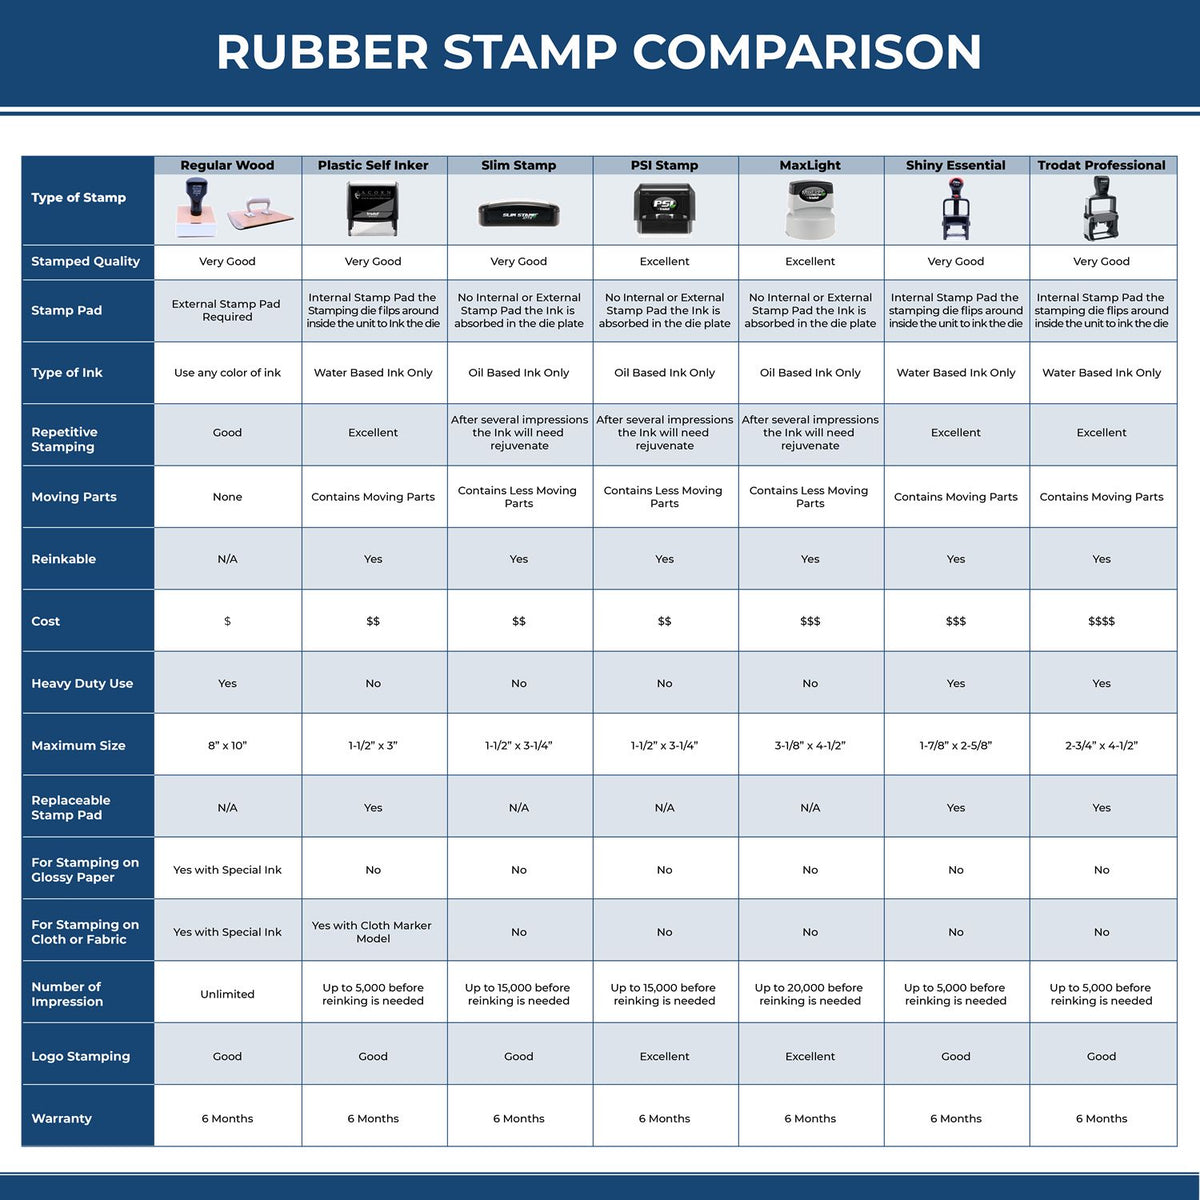 Large Self-Inking Special Stamp 5572S Rubber Stamp Comparison